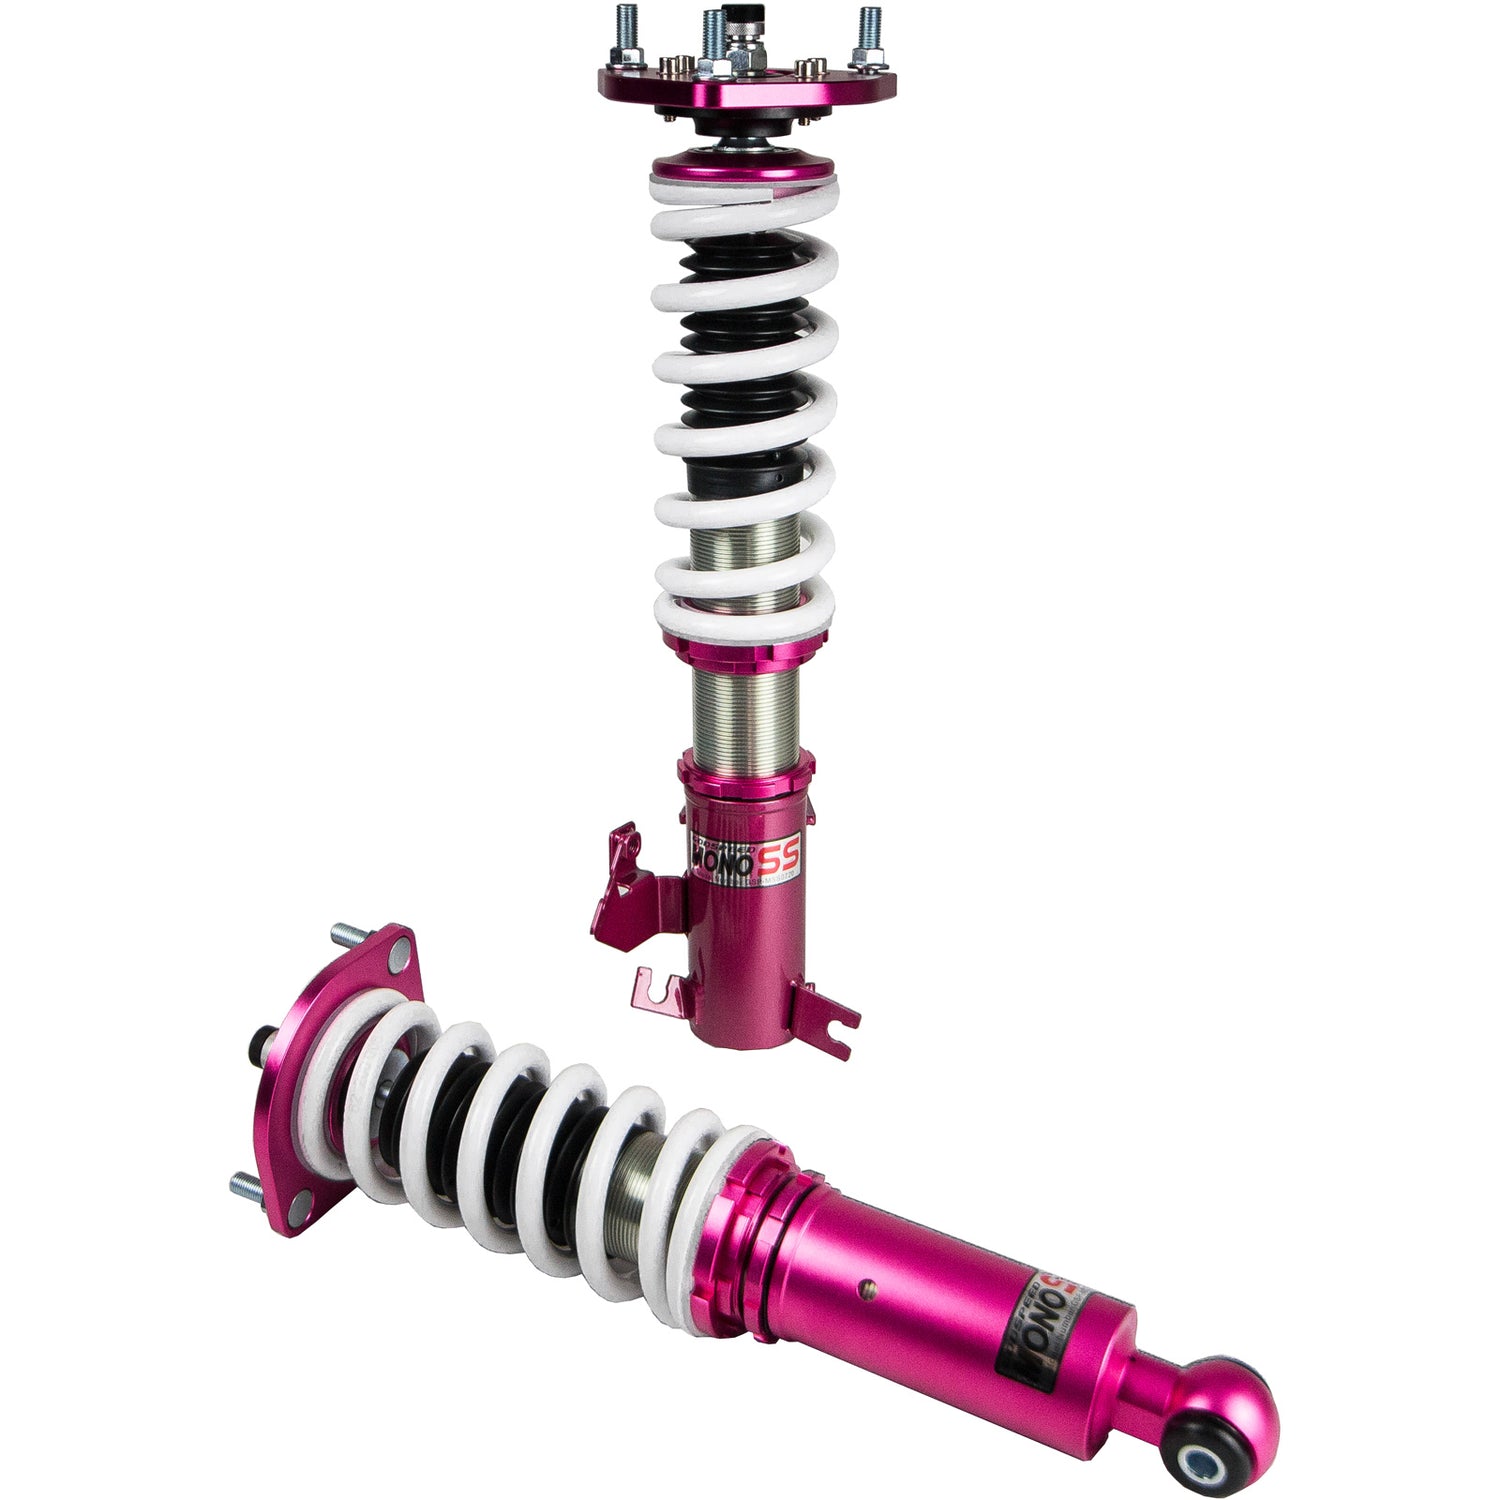 Godspeed MSS0720-B MonoSS Coilover Lowering Kit, Fully Adjustable, Ride Height, Spring Tension And 16 Click Damping, Infiniti i30/i35 2000-04(CA33)